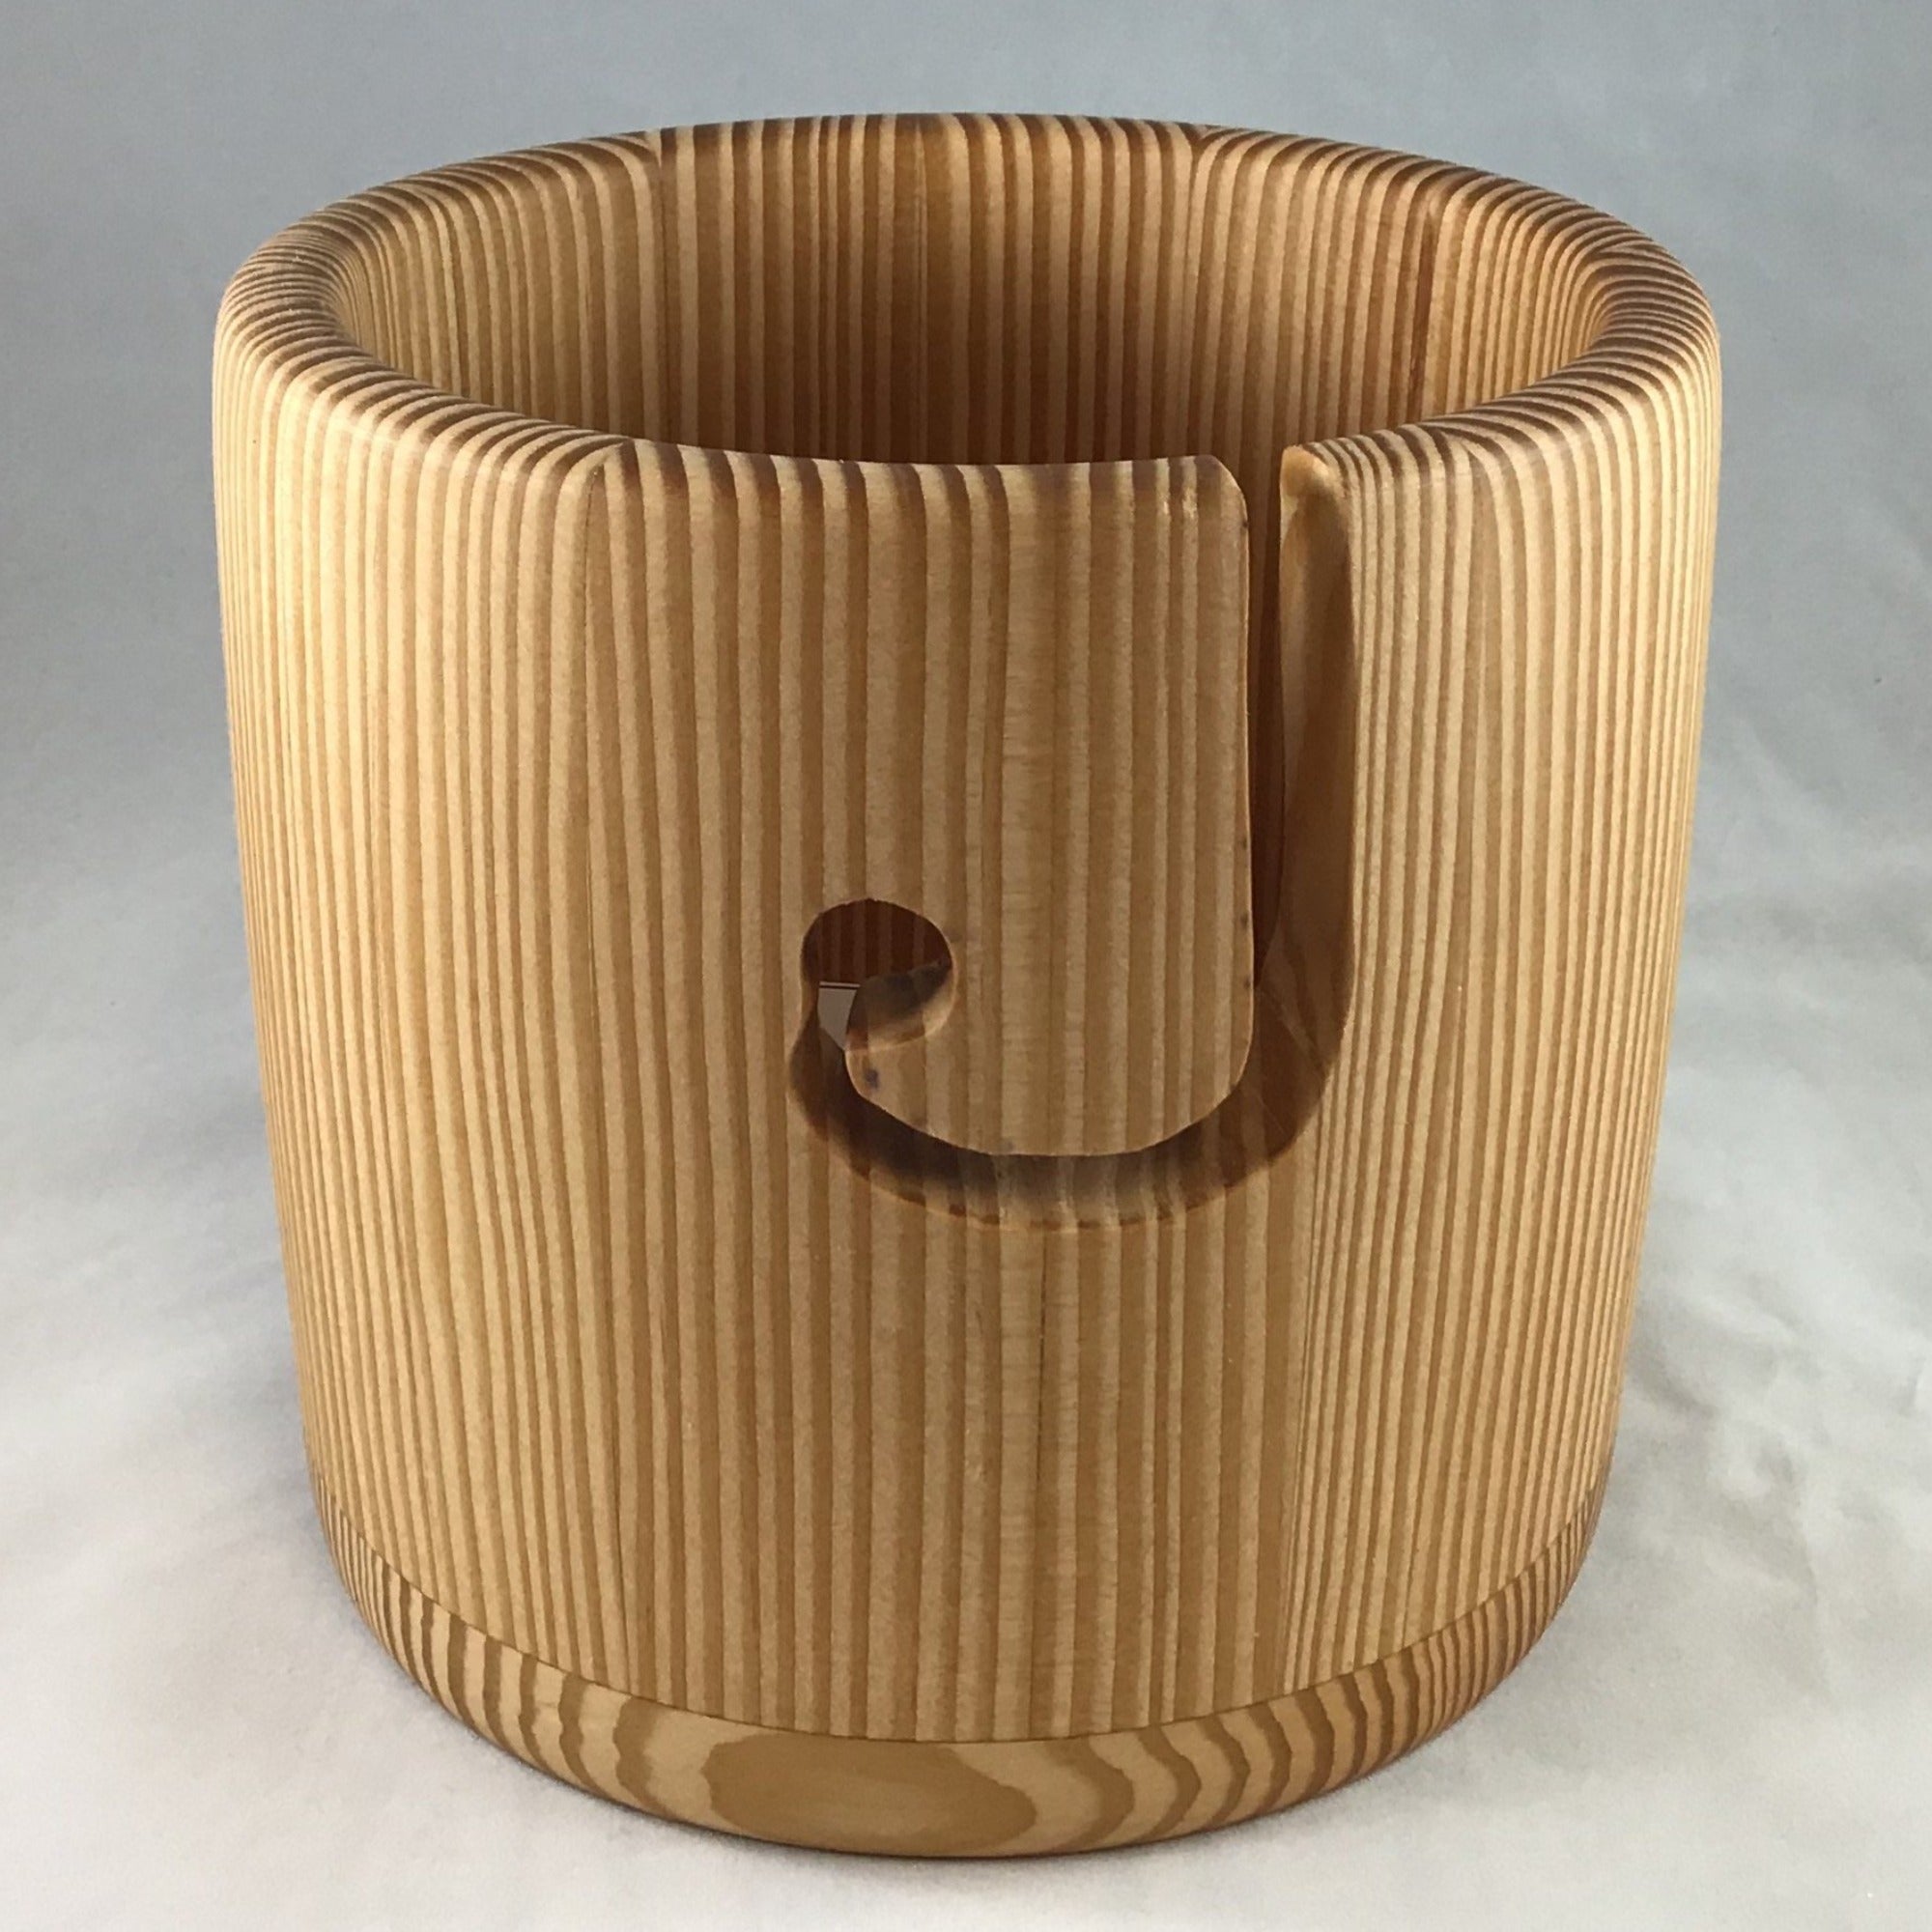 Jerry Ertle One-of-a-Kind Wood Yarn Bowl – White Ash #161